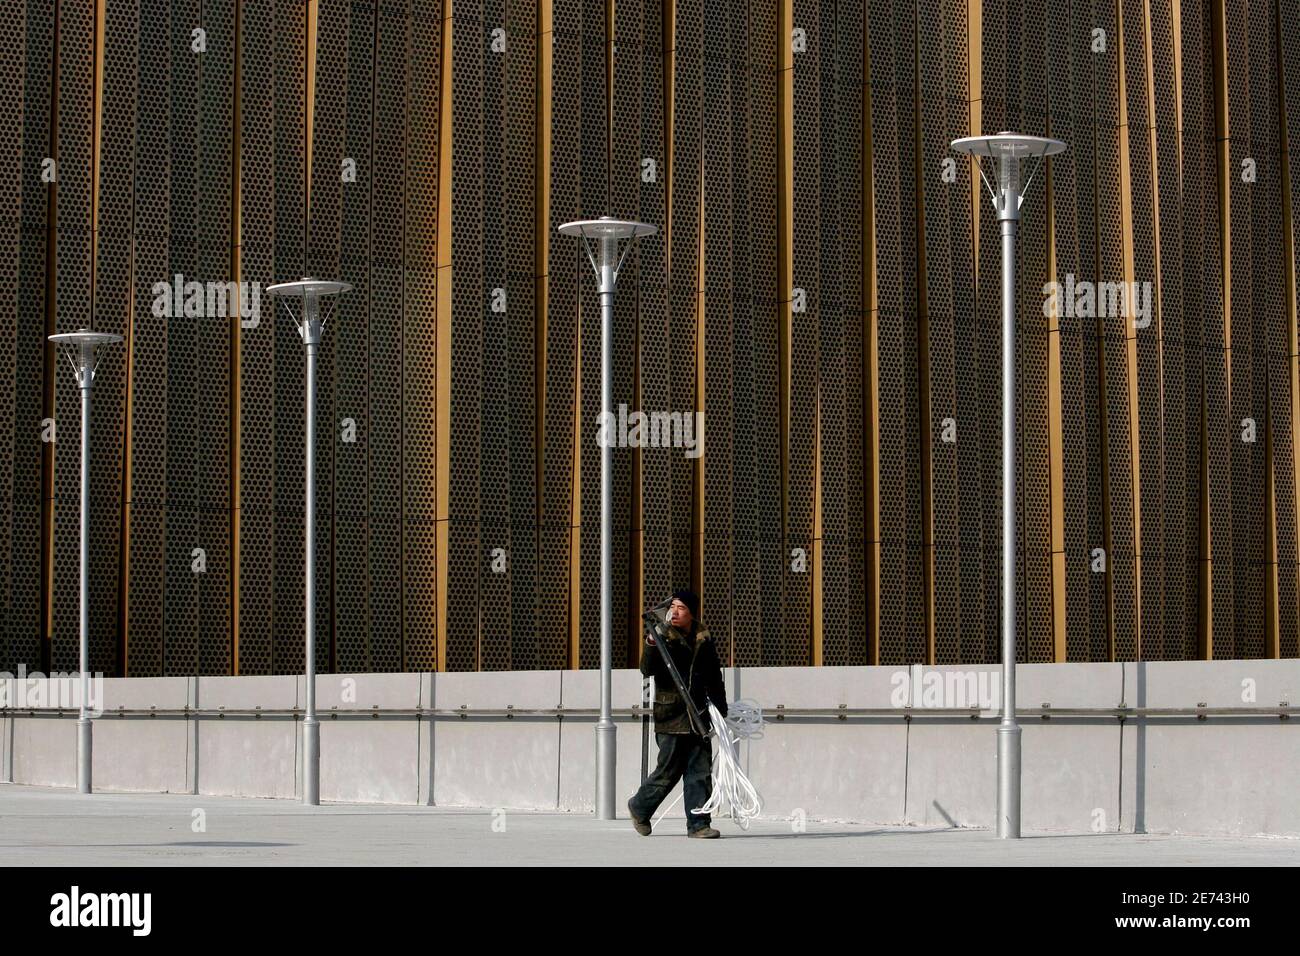 A worker walks outside the Beijing Olympic Basketball Gymnasium in Beijing January 15, 2008. The 18,000-seat venue has been shrouded in straw-coloured aluminium after officials decided at the last moment that the jade-coloured frosted opaque glass of the original design was 'dull and tedious'.  Picture taken January 15, 2008. REUTERS/Jason Lee (CHINA) Stock Photo